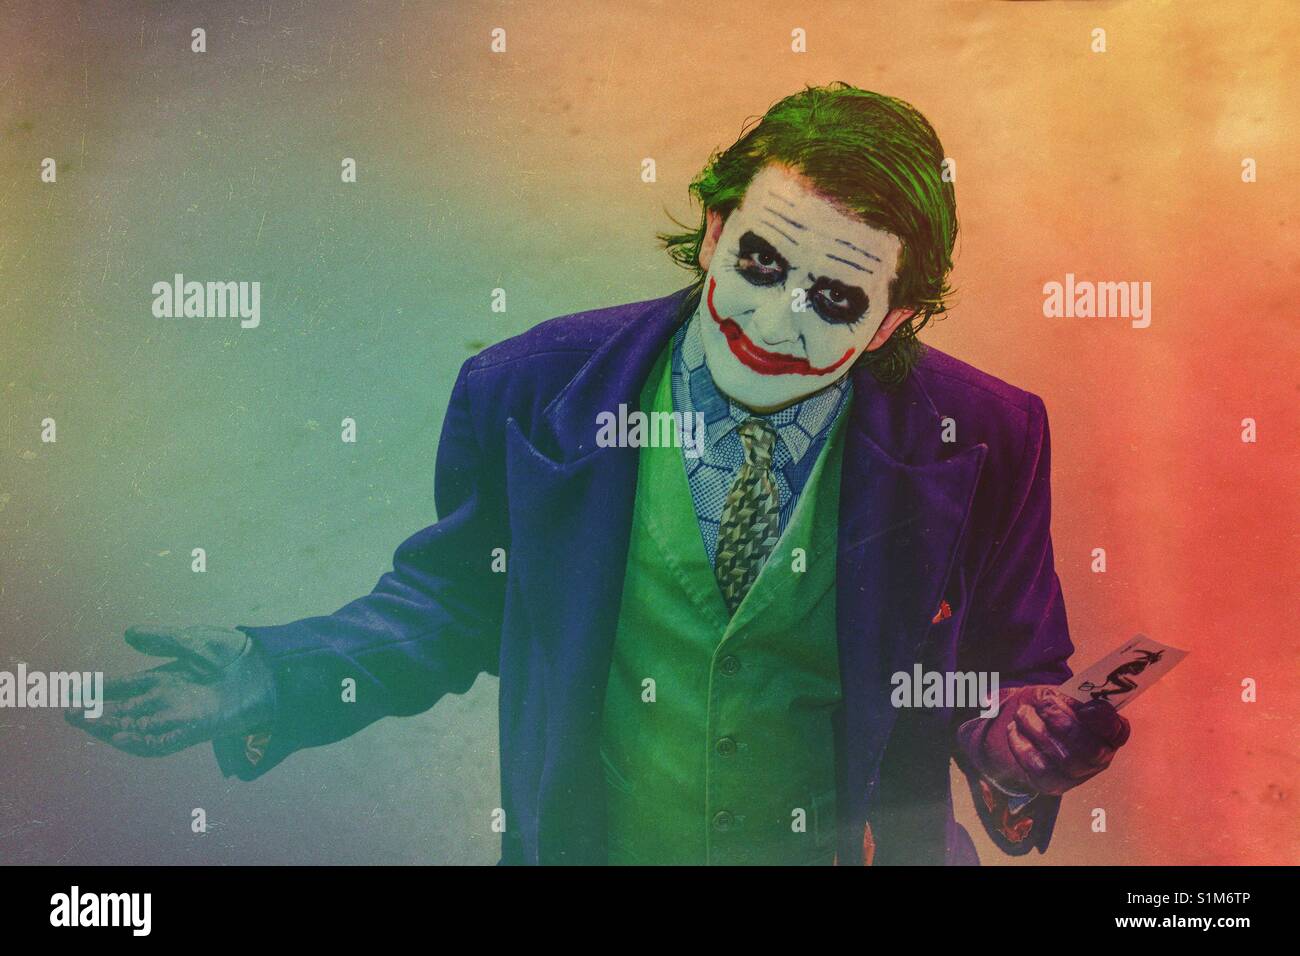 The Joker from Batman The Dark Knight movie is a villain and bad guy who is portrayed by a cos play man at a comic con event Stock Photo